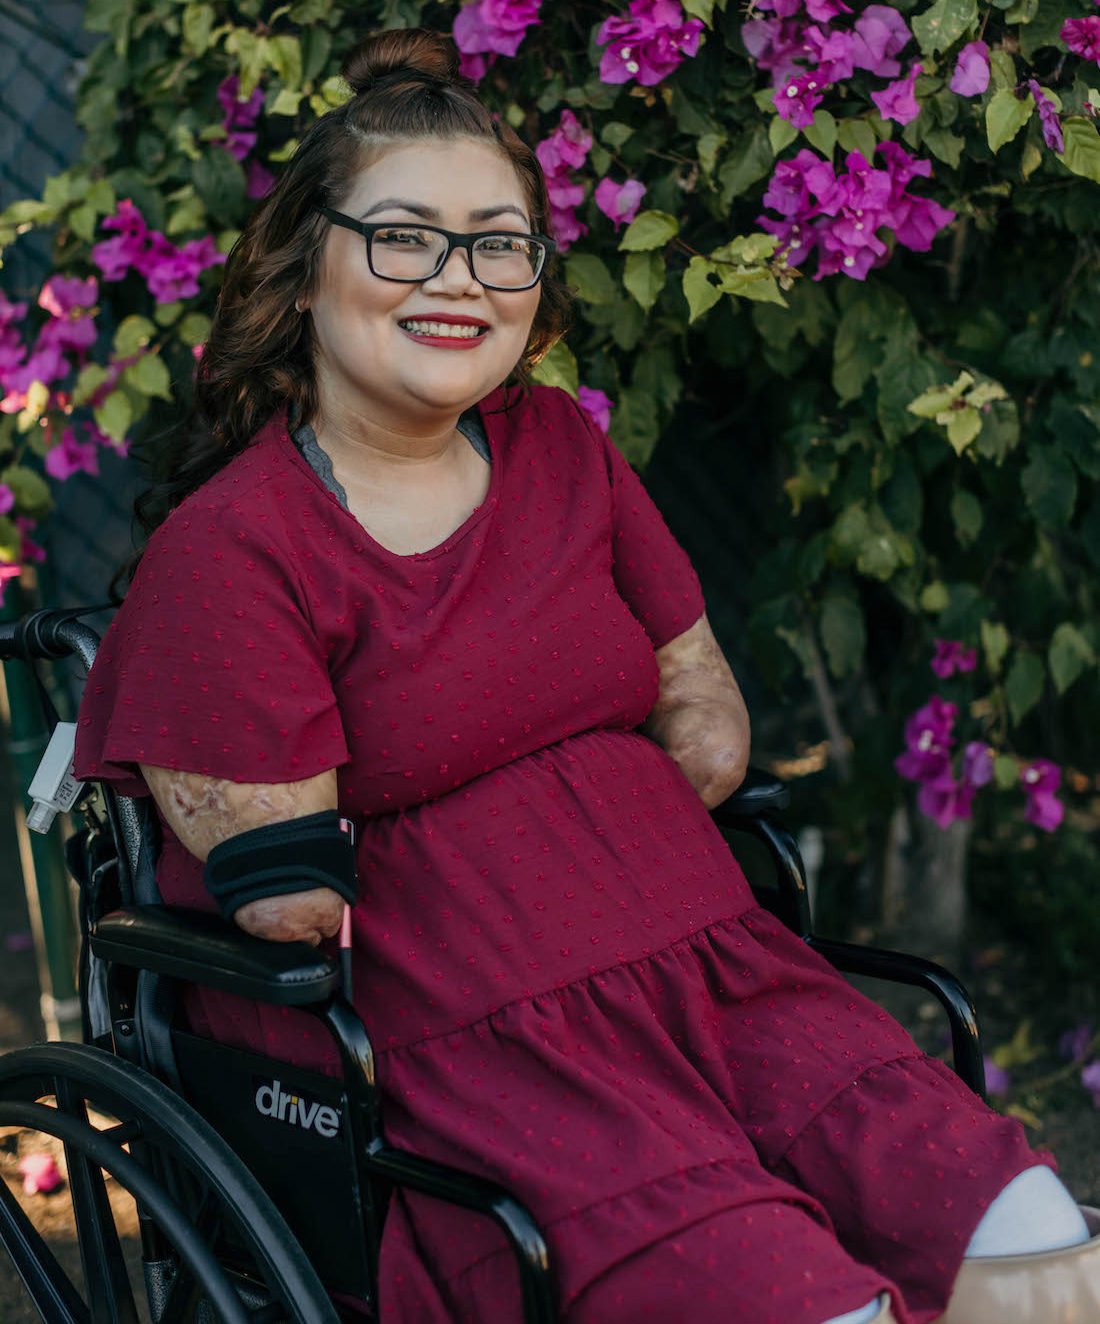 A Disabled Woman With A Prosthetic Leg Laughs In A Beautiful